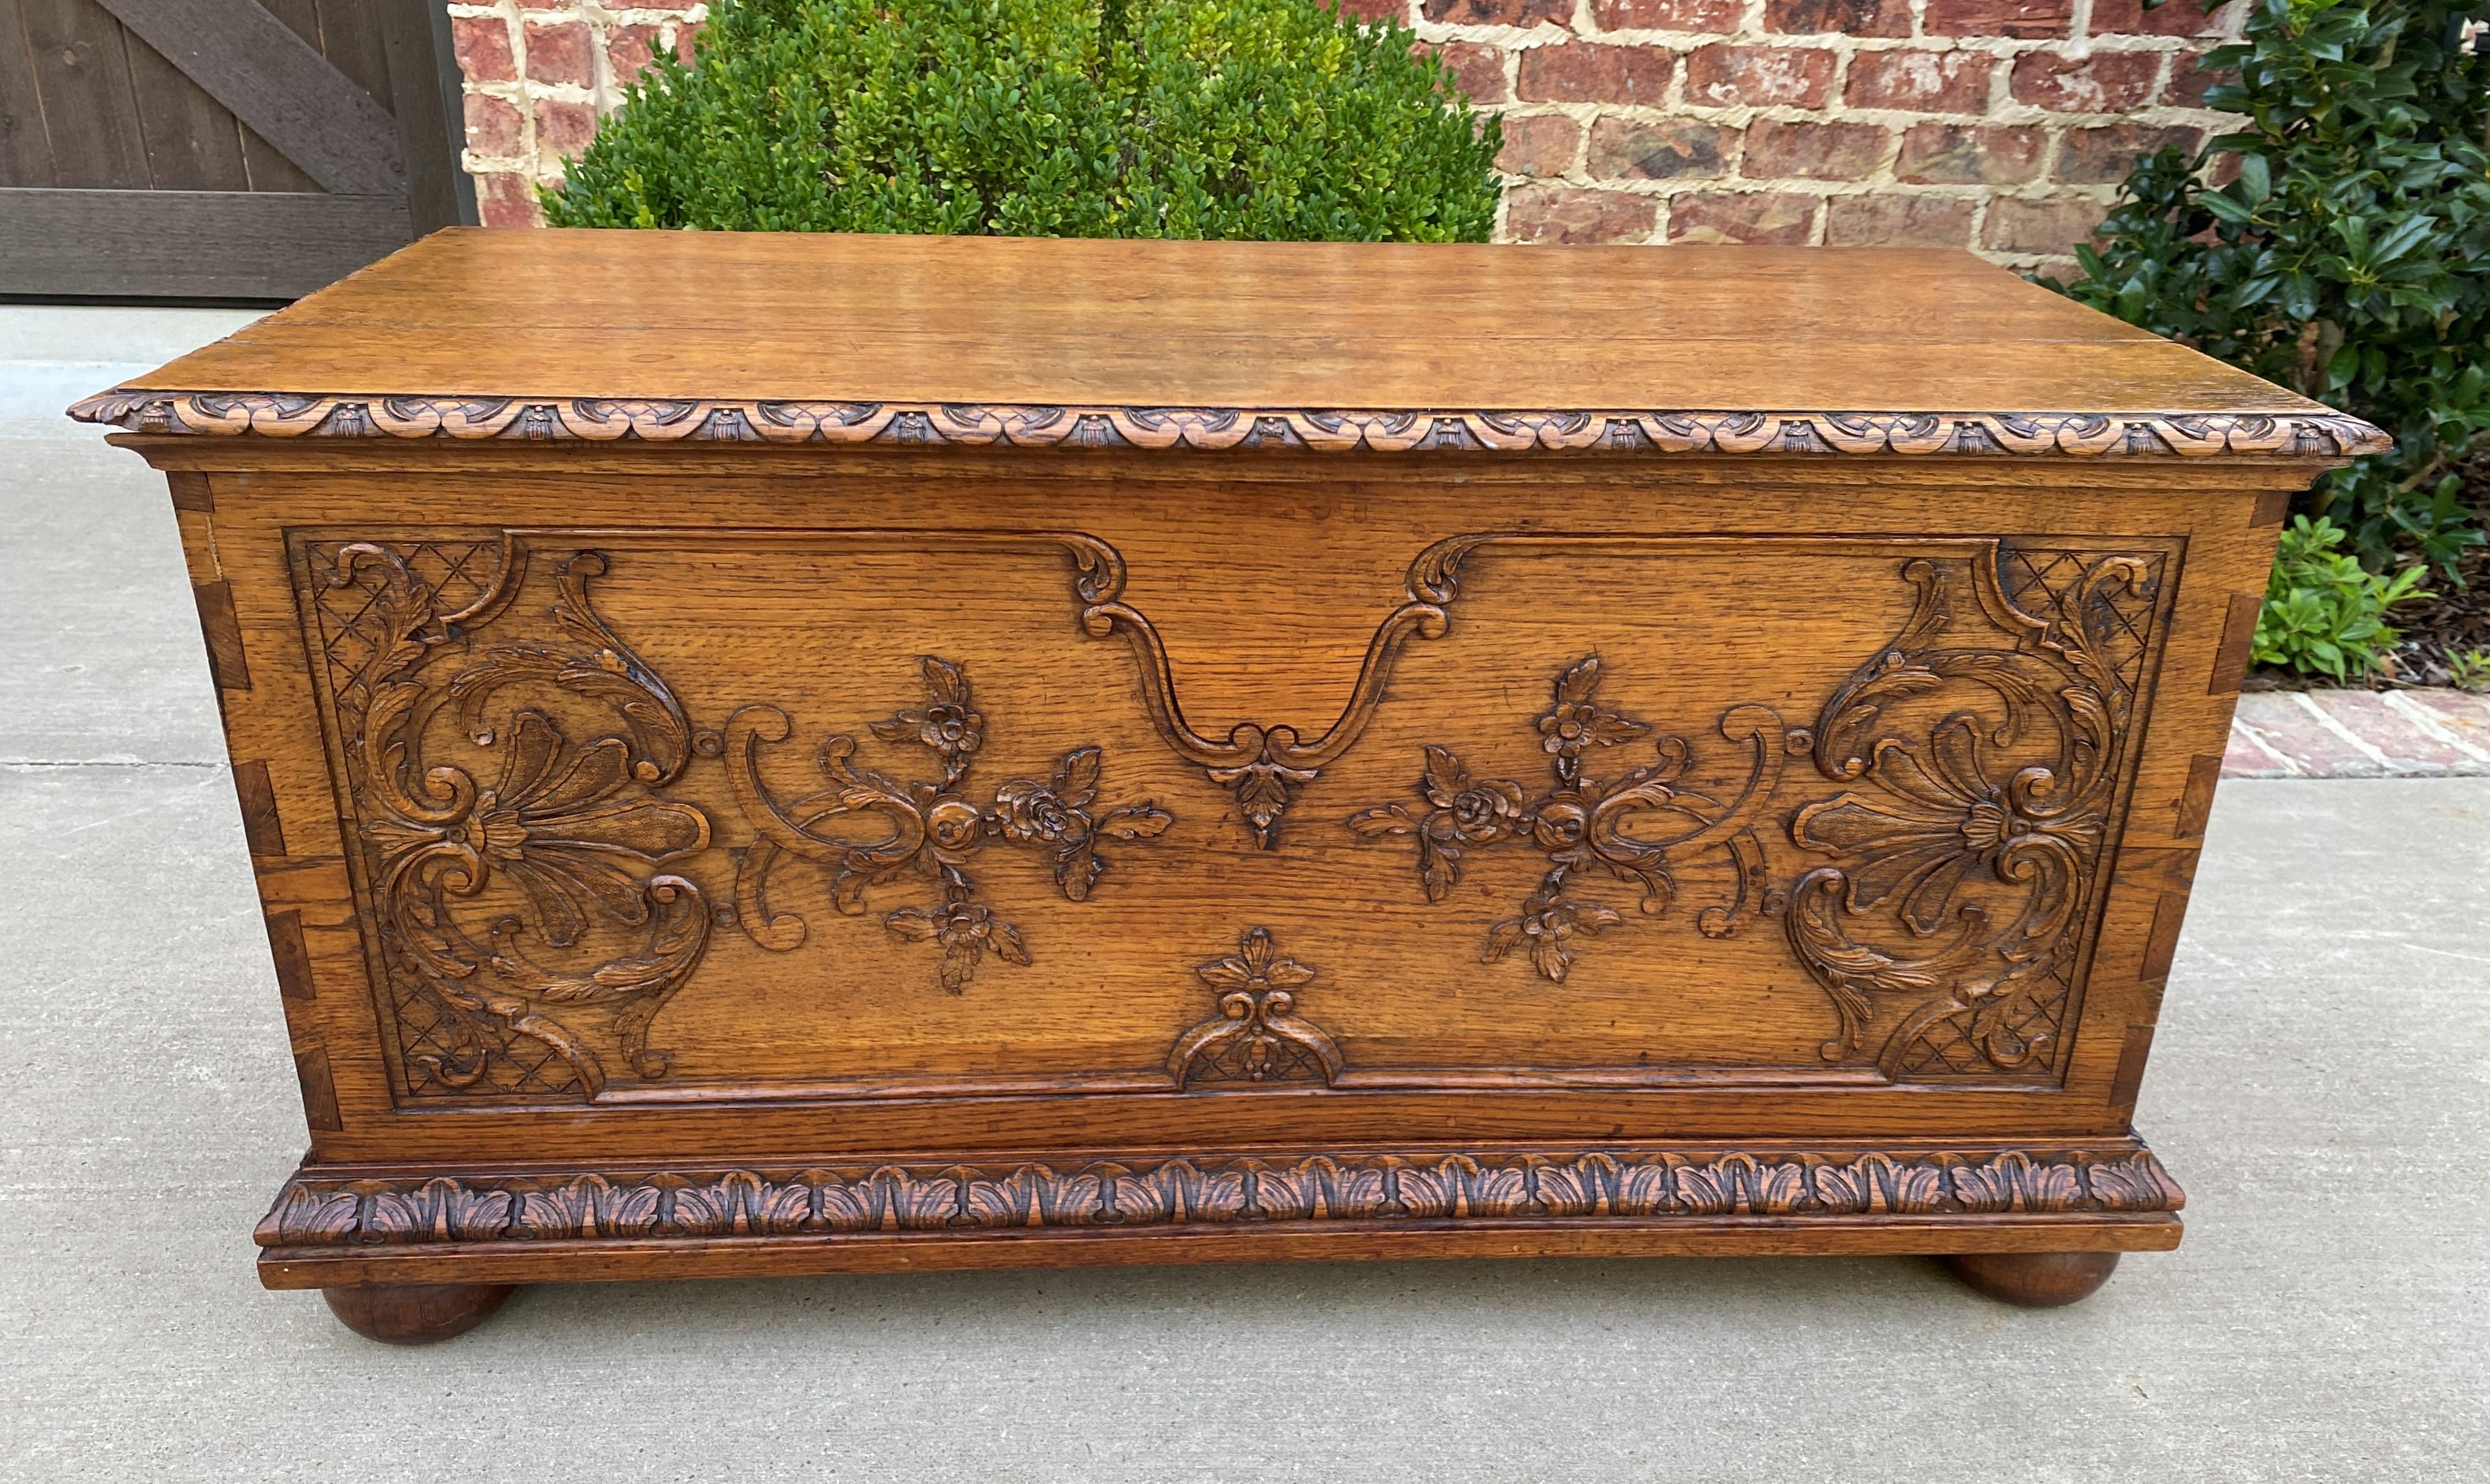 Beautiful and Charming Antique French Country Oak Trunk, Blanket Box, Storage Chest, Coffer, or Coffee Table~~Exposed Dovetailed Construction~~c. 1890s-1900

Wonderful Louis XV style acanthus and shell carvings with lattice, bellflower and rosette